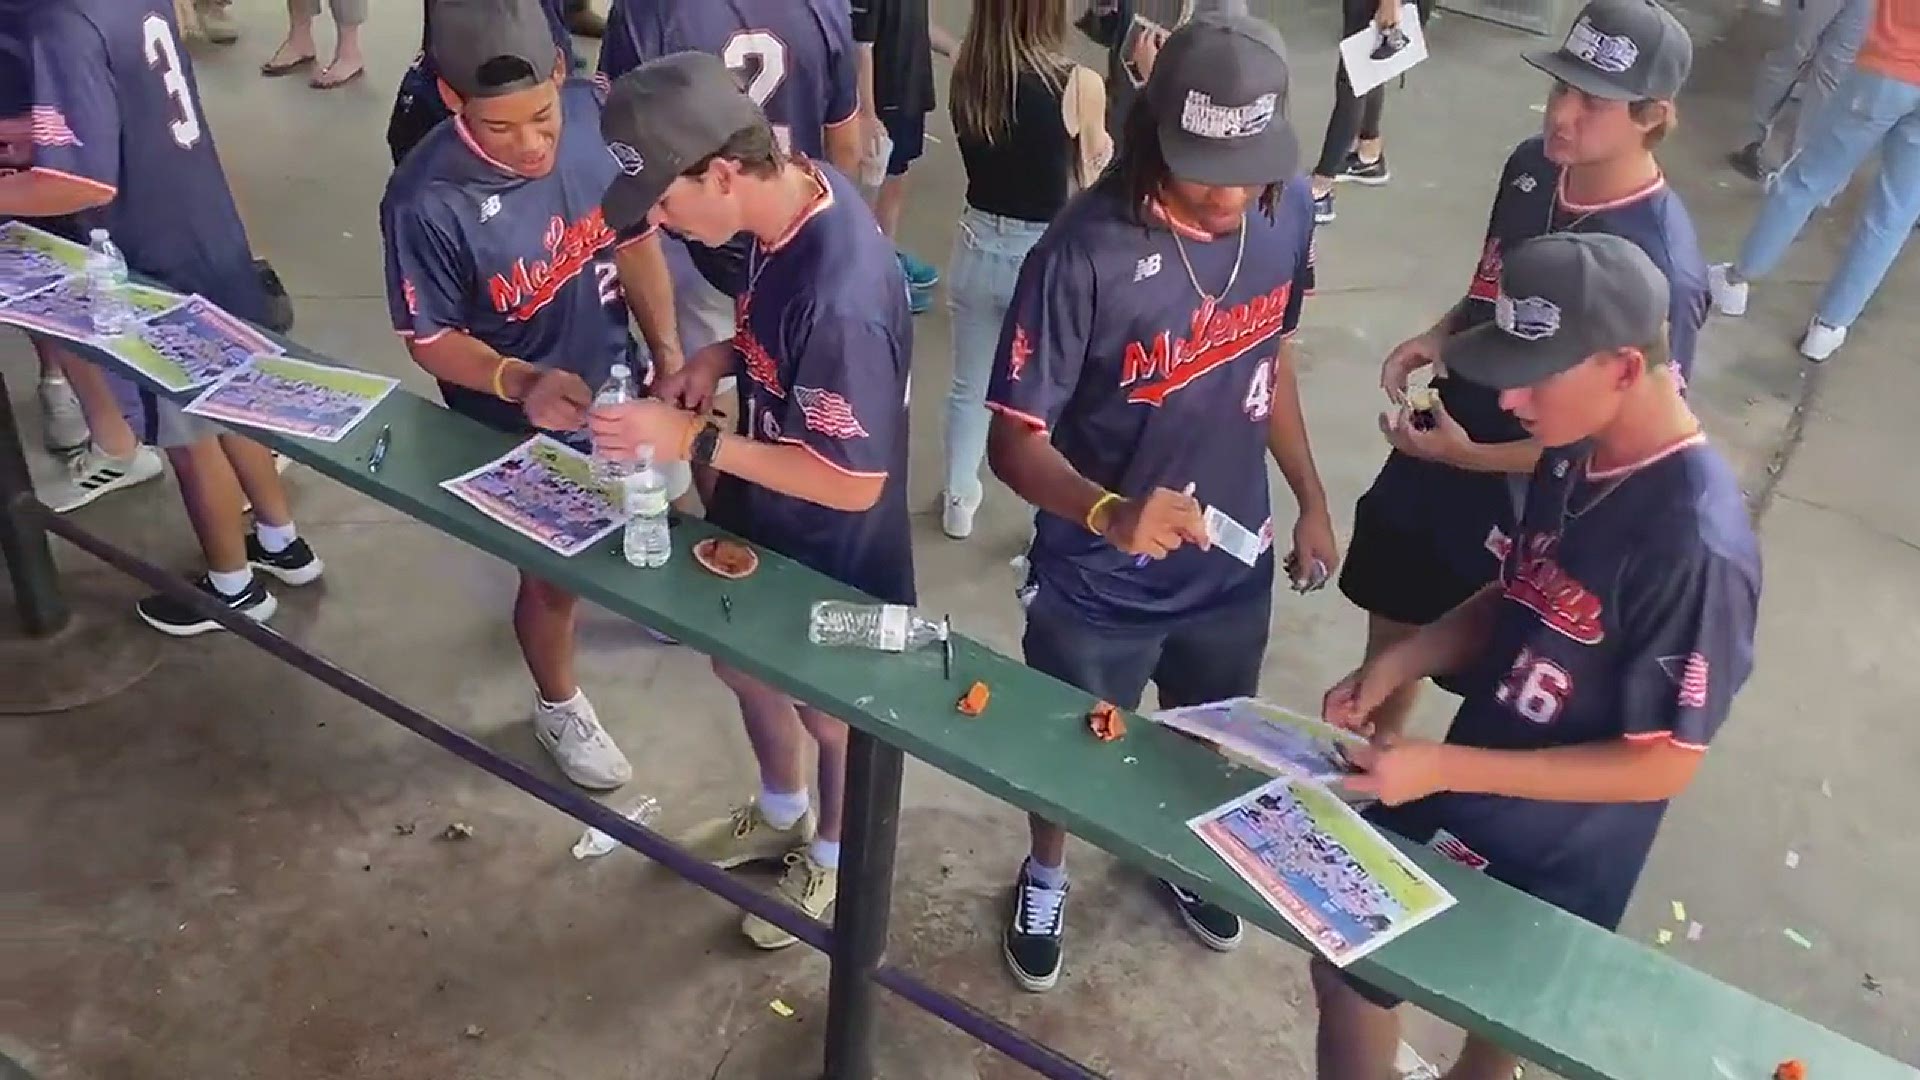 The Highlanders signed autographs at The Backyard in Waco during an even celebrating their JUCO World Series championship win. Credit: Kurtis Quillin